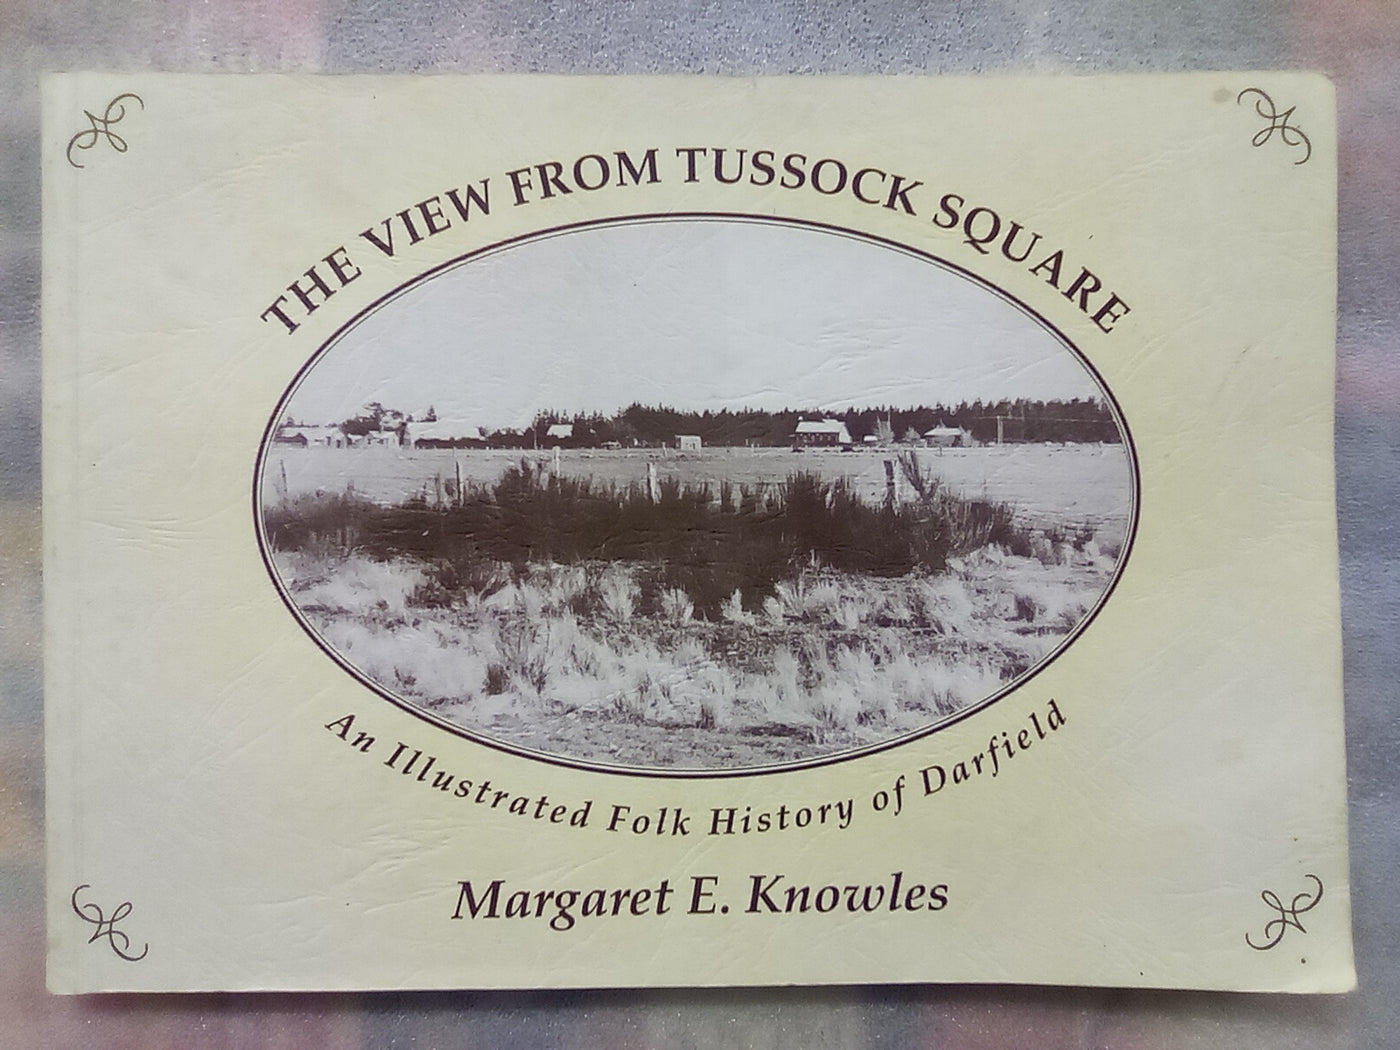 The View From Tussock Square - An illustrated History of Darfield